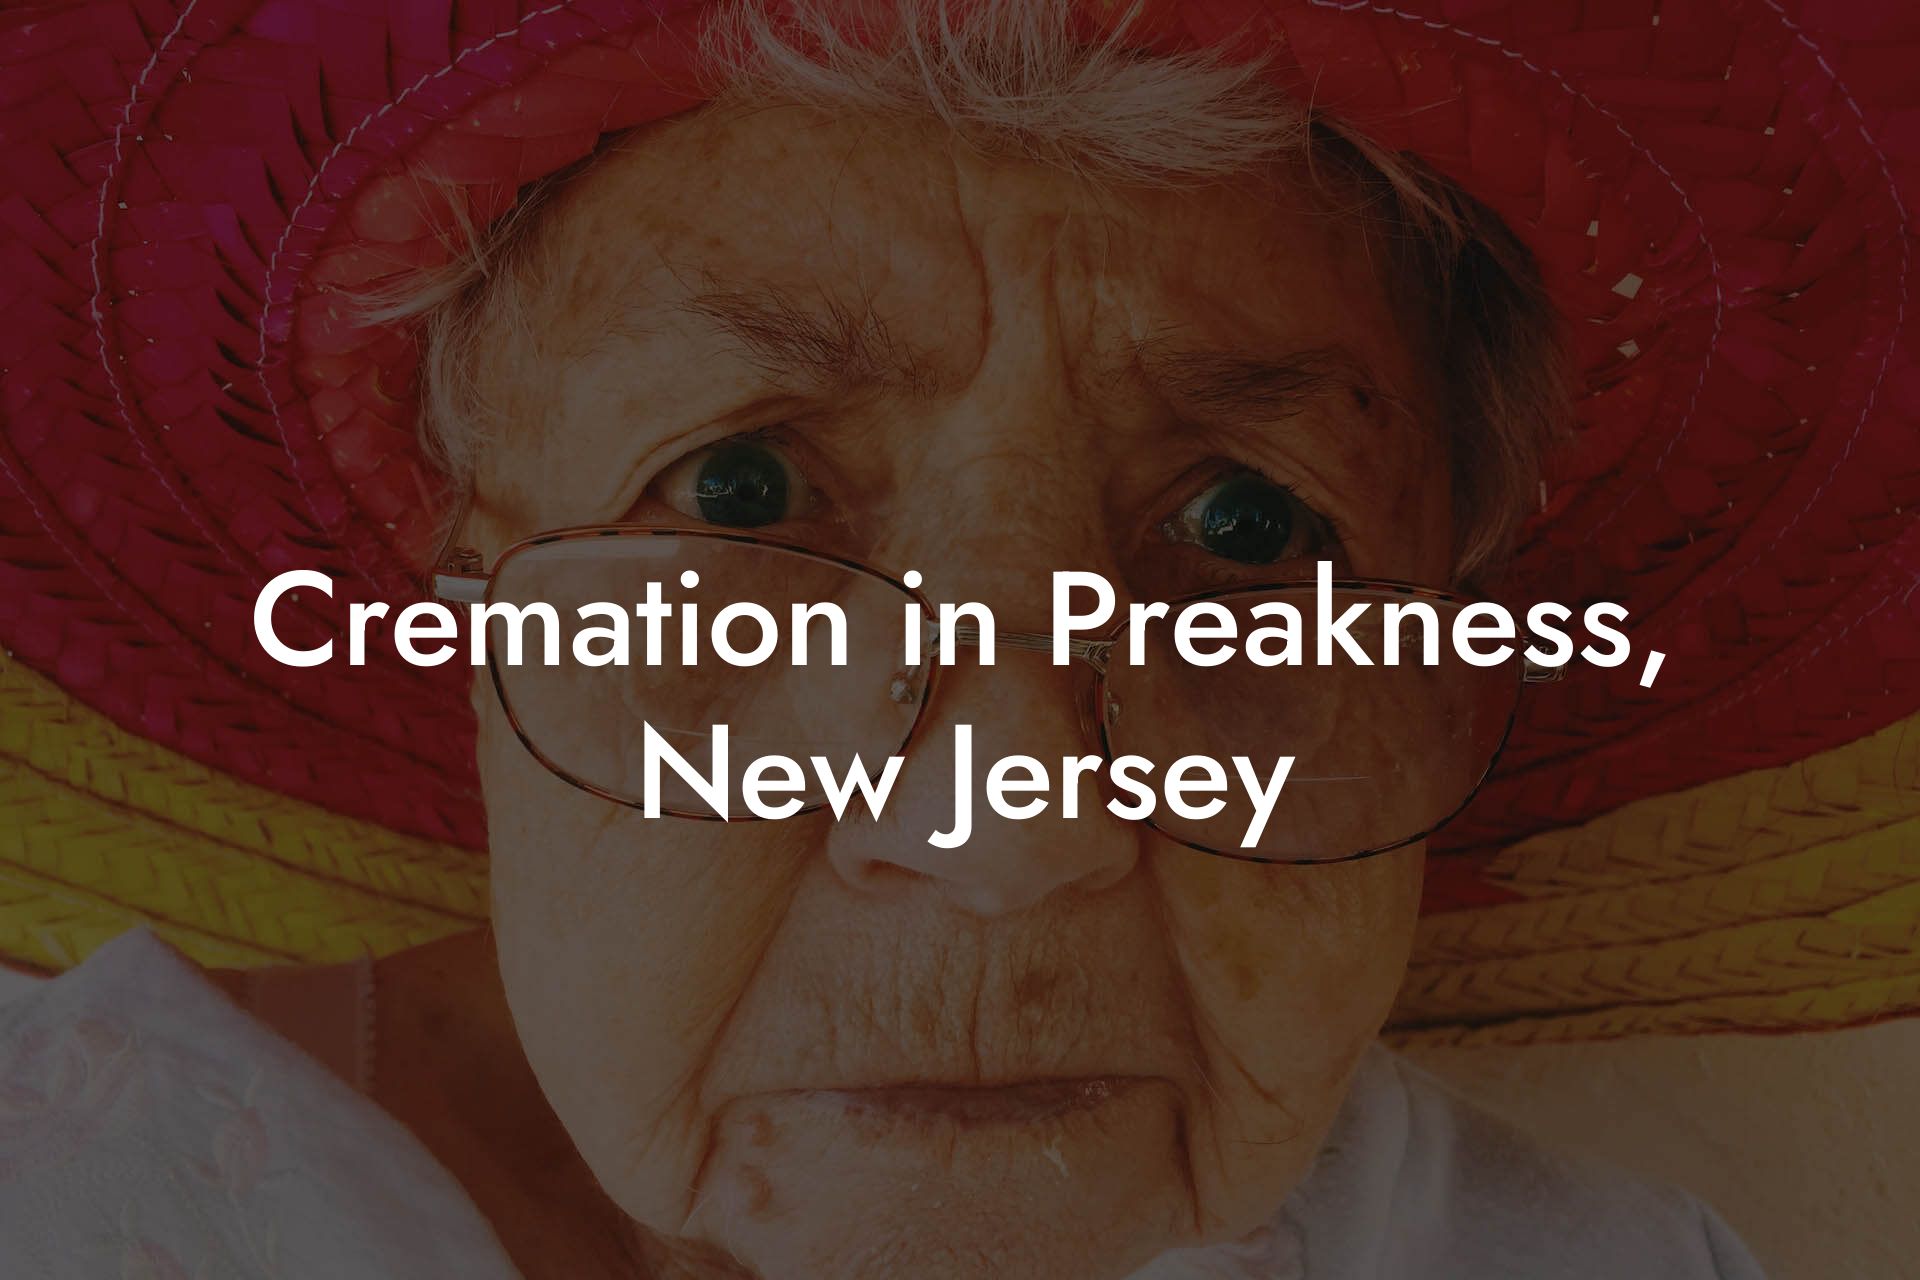 Cremation in Preakness, New Jersey